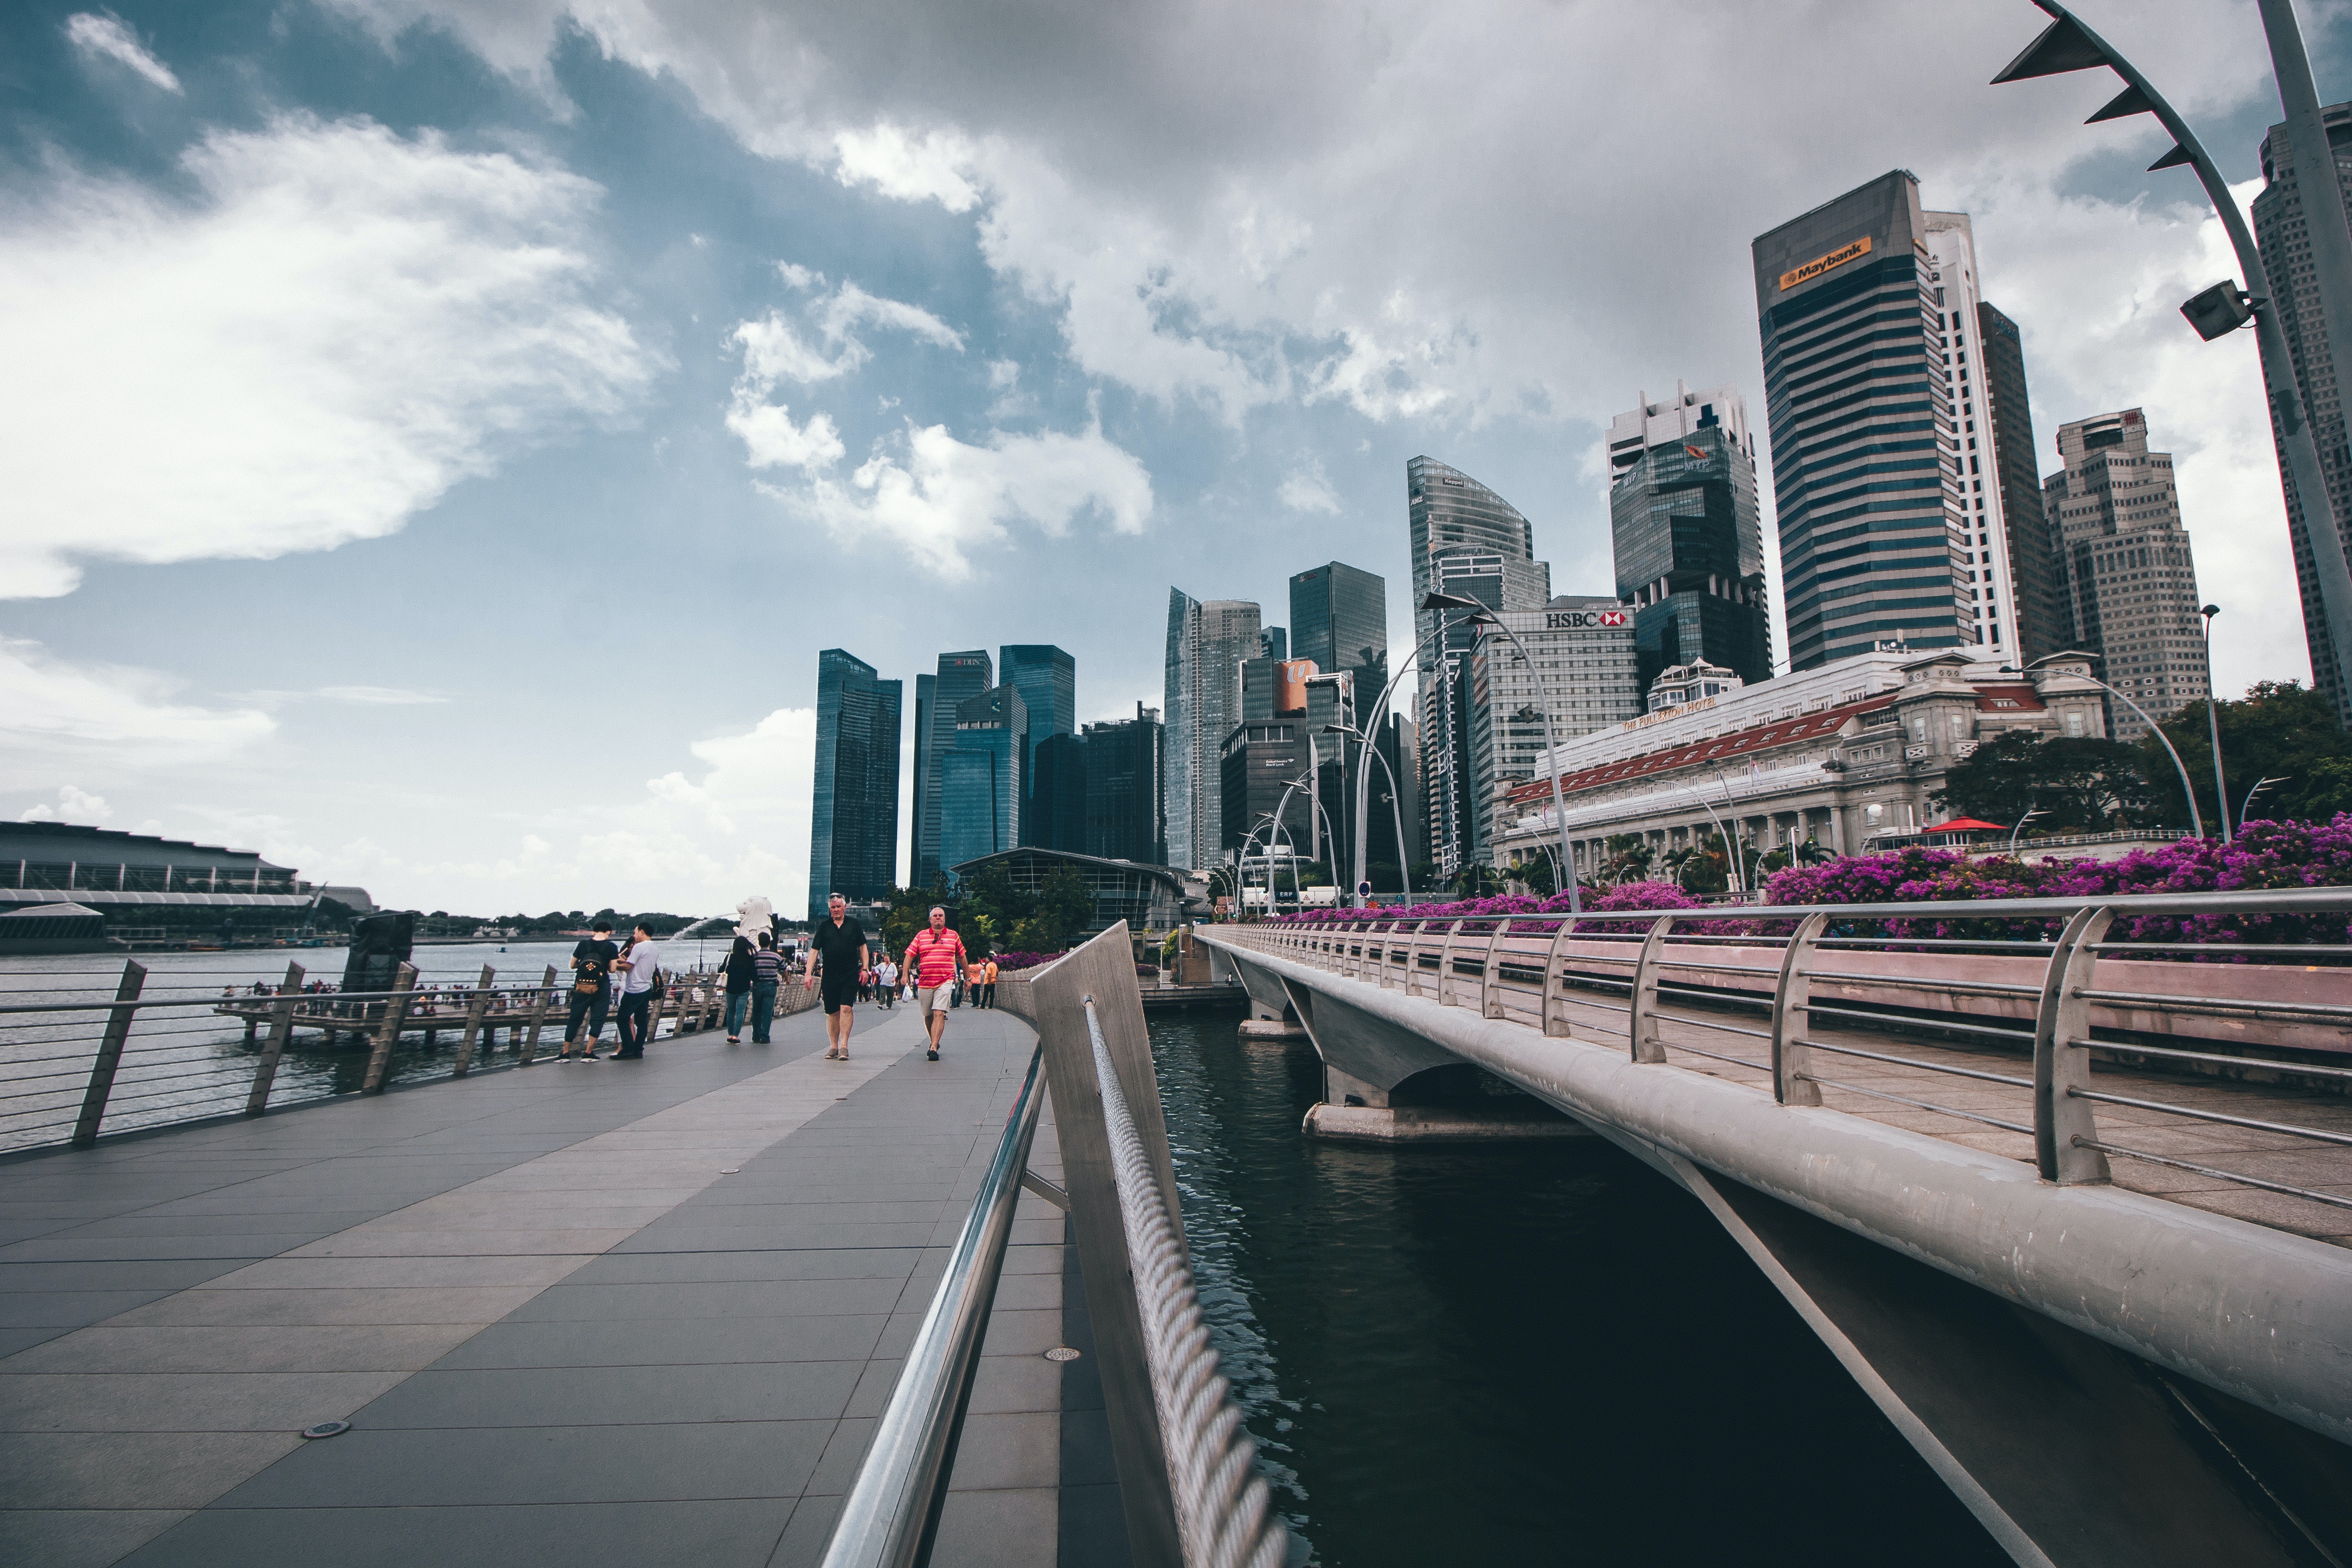 Key updates for meetings and events in Singapore starting 19 August